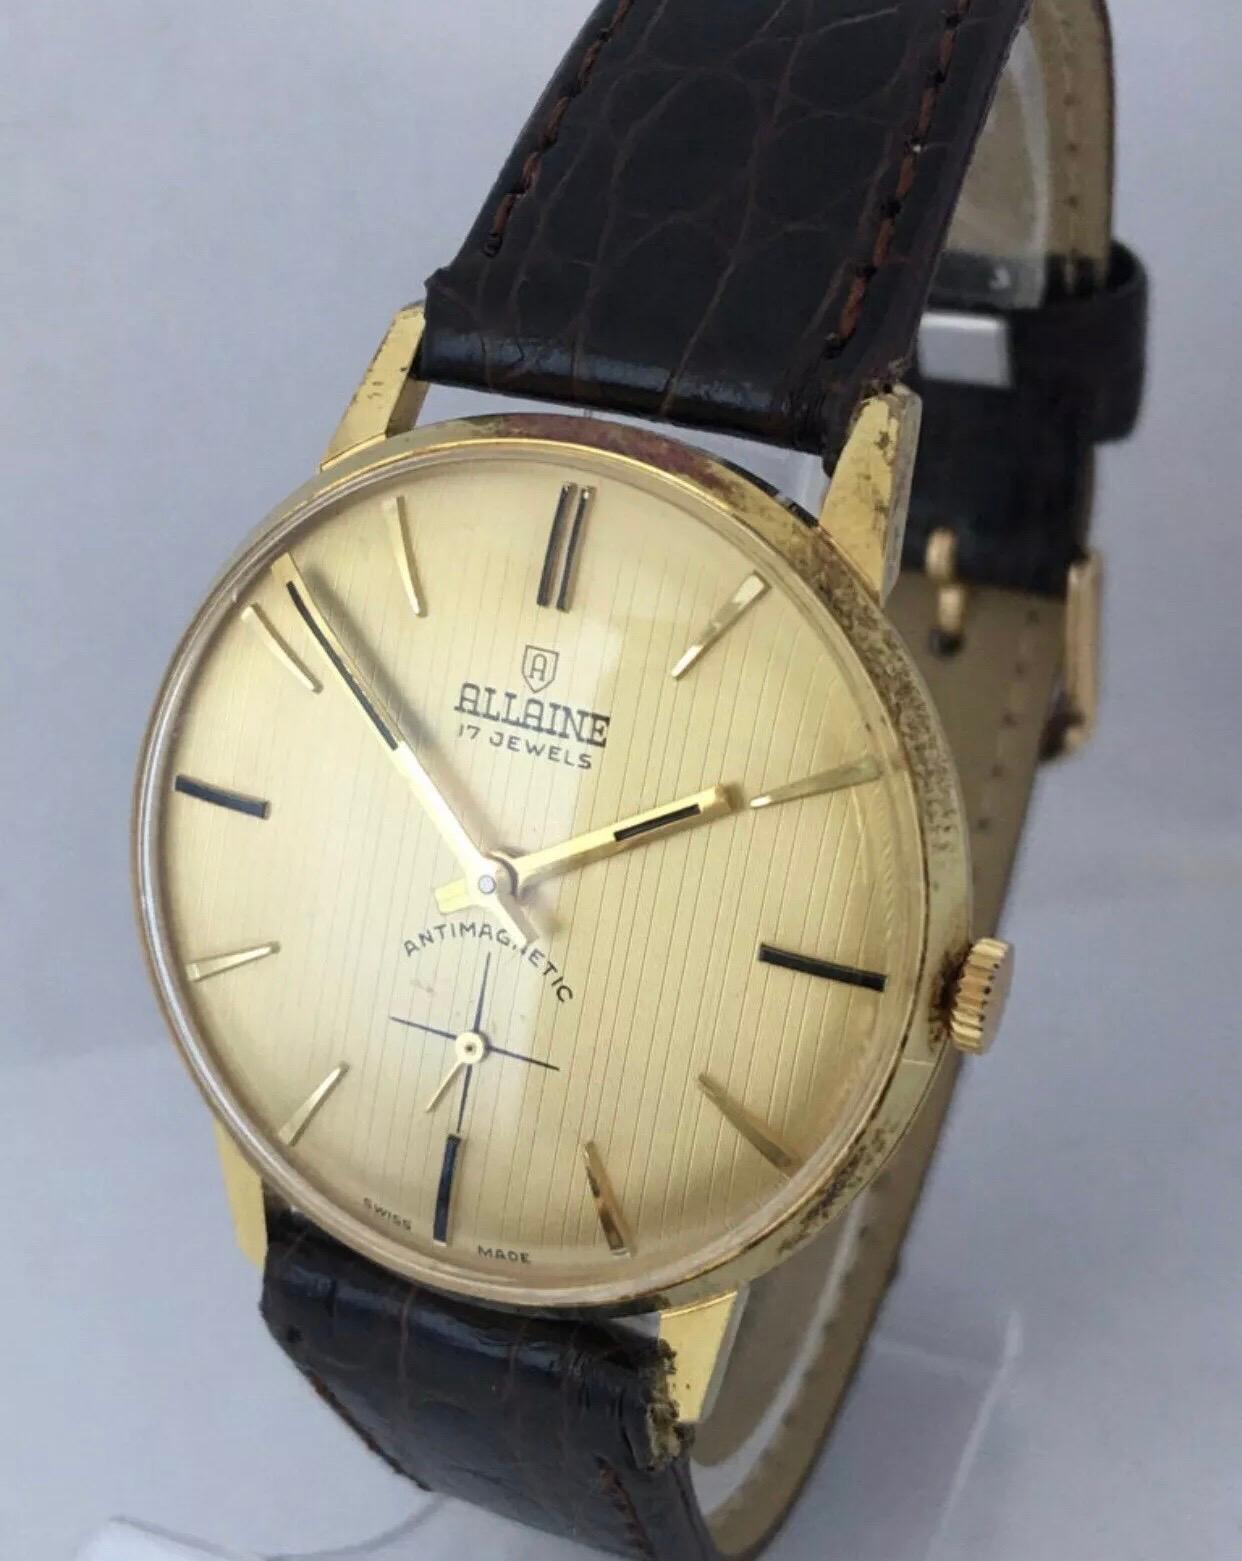 Vintage Gold-Plated and Stainless Steel Swiss Mechanical Watch 4